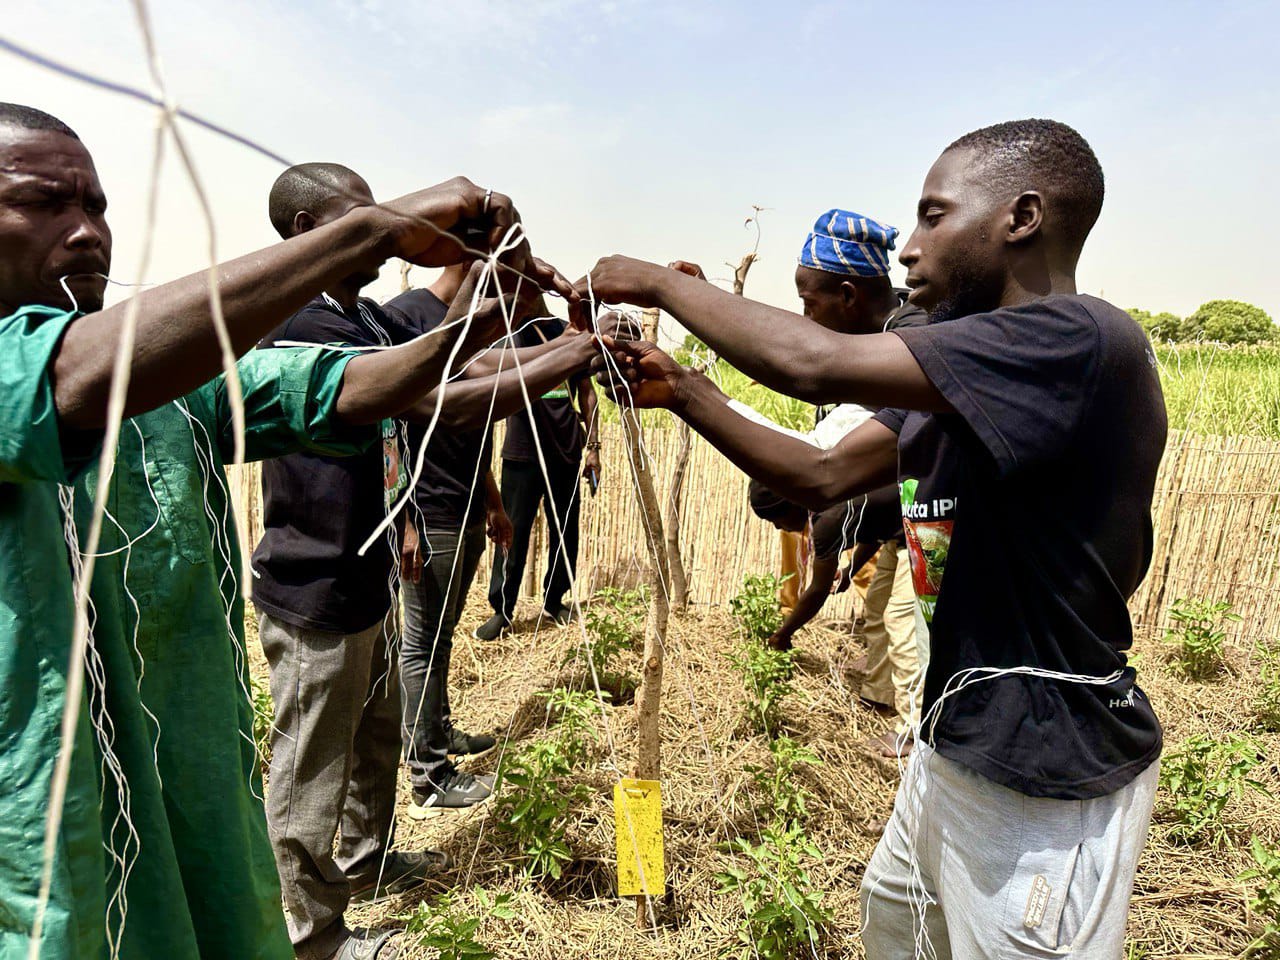 Group of male farmers practice setting up trellising for tomato plants.